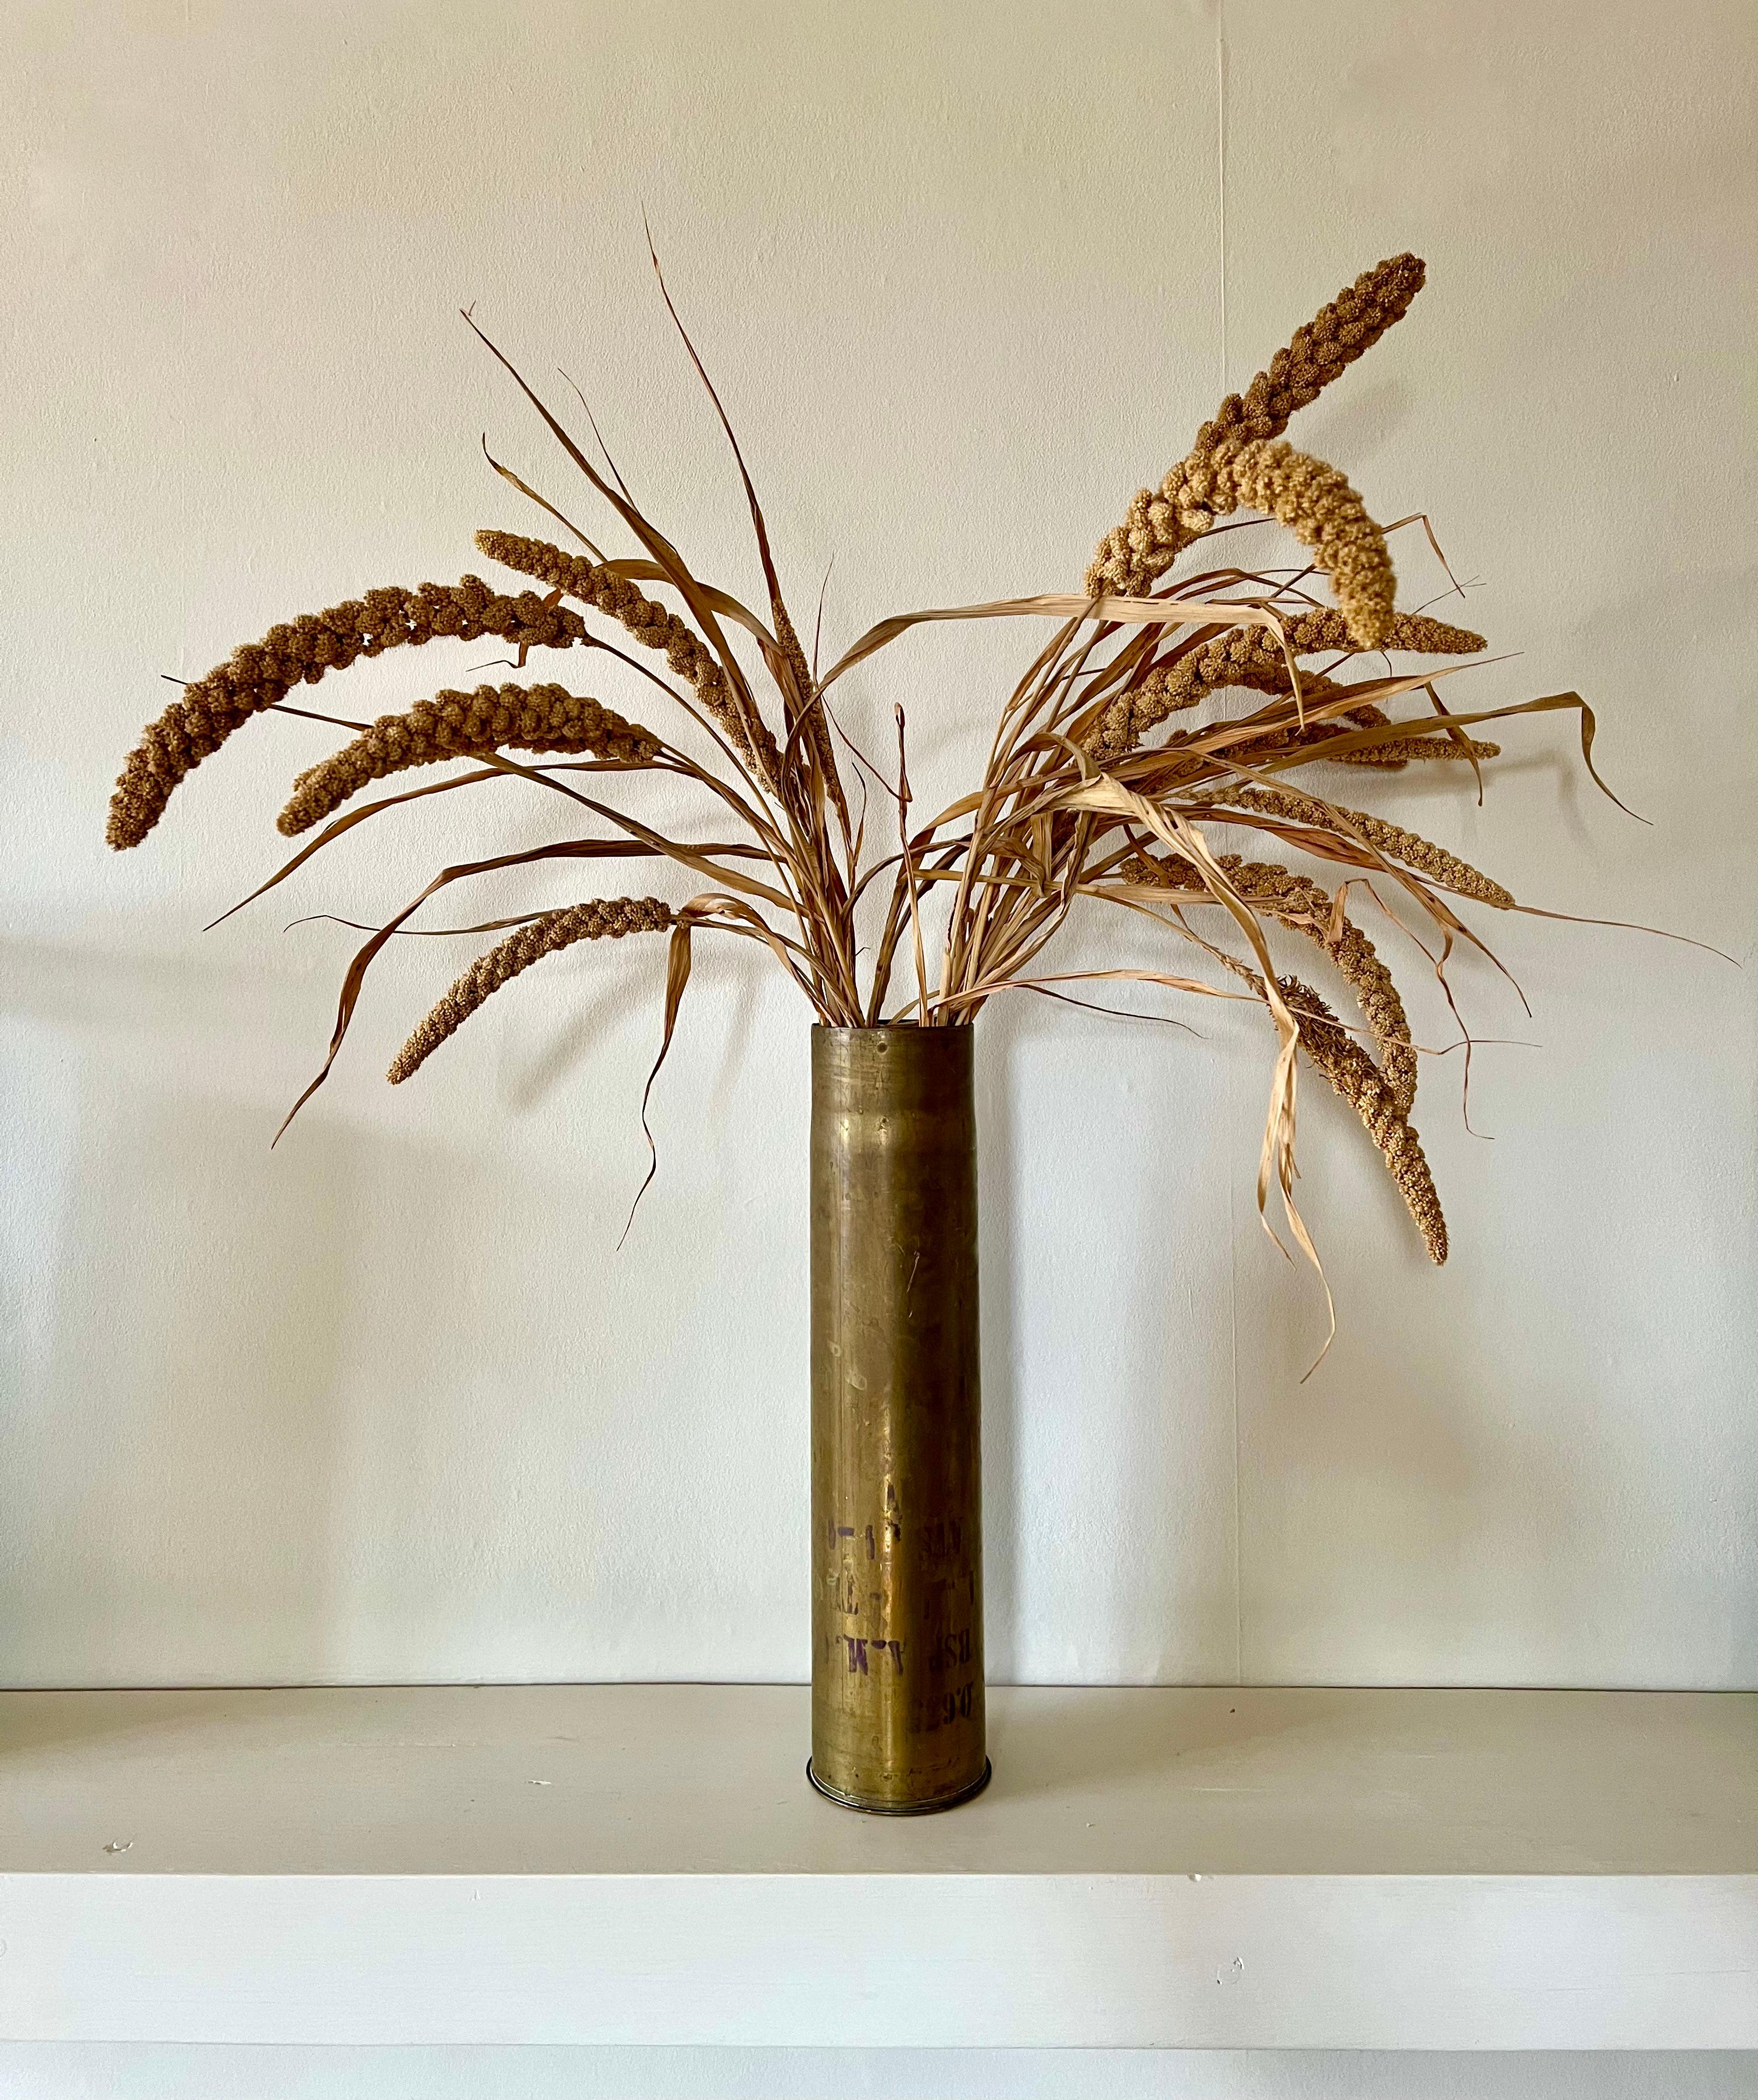 A pair of tall solid brass reclaimed vases

Early to mid 20th century reclaimed French WW1 or WW2 shells

In excellent condition. No dents, scratches or holes, great patina (could be polished to a shine if desired) and original markings one one